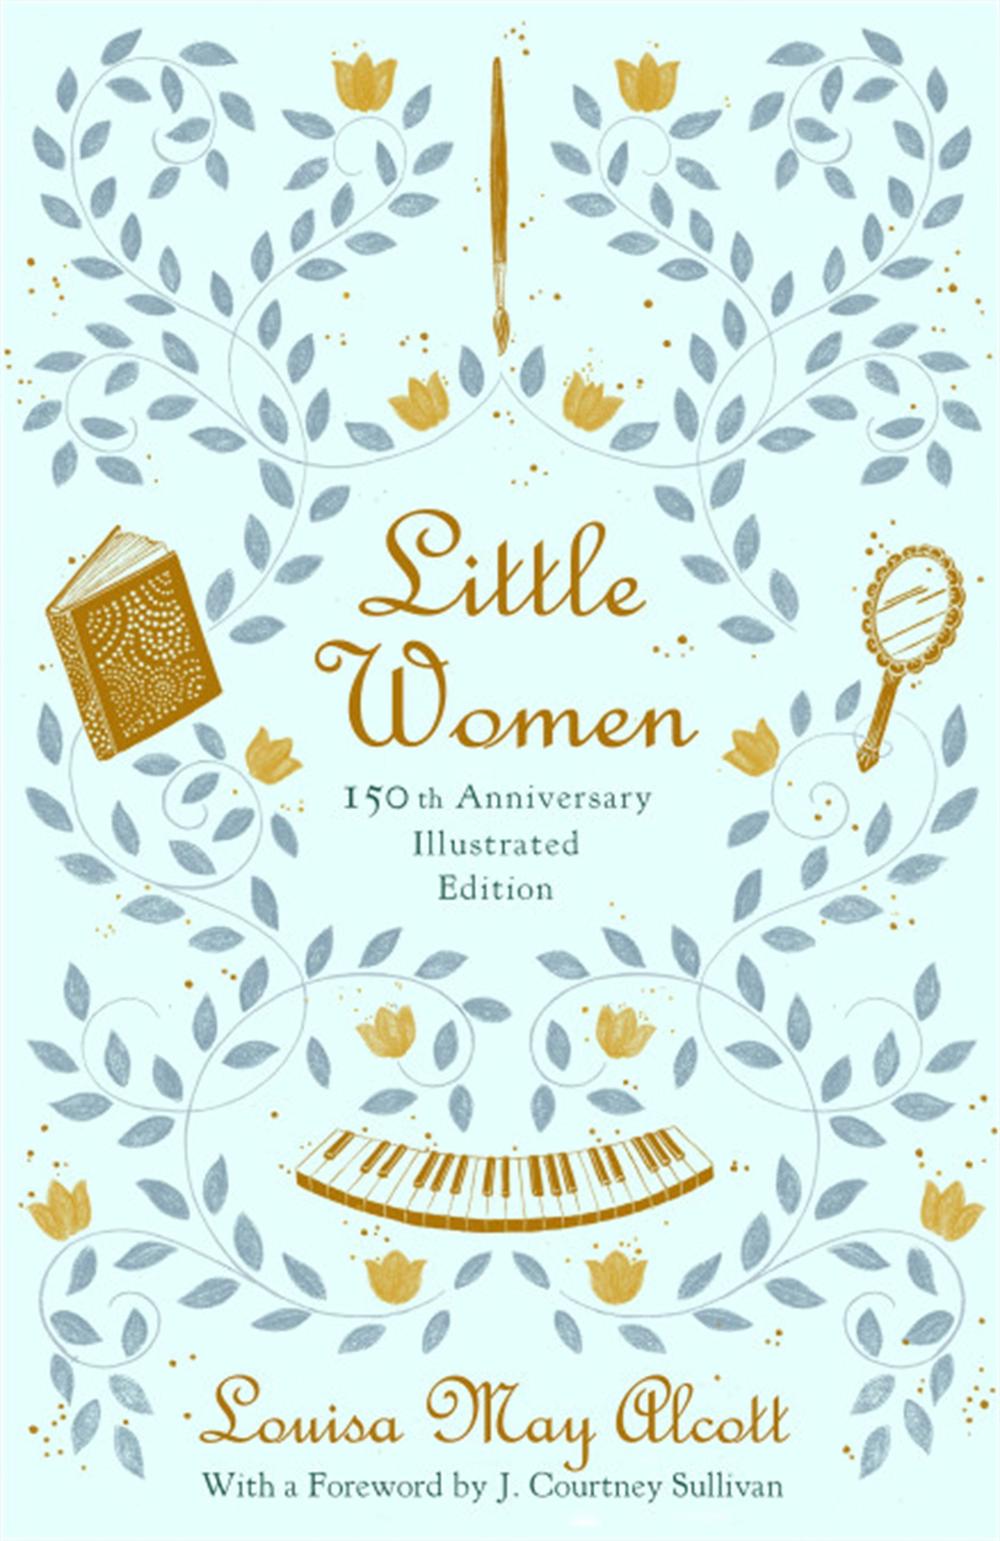 Little Women (150th Anniversary Edition) (Hardcover) - image 1 of 4